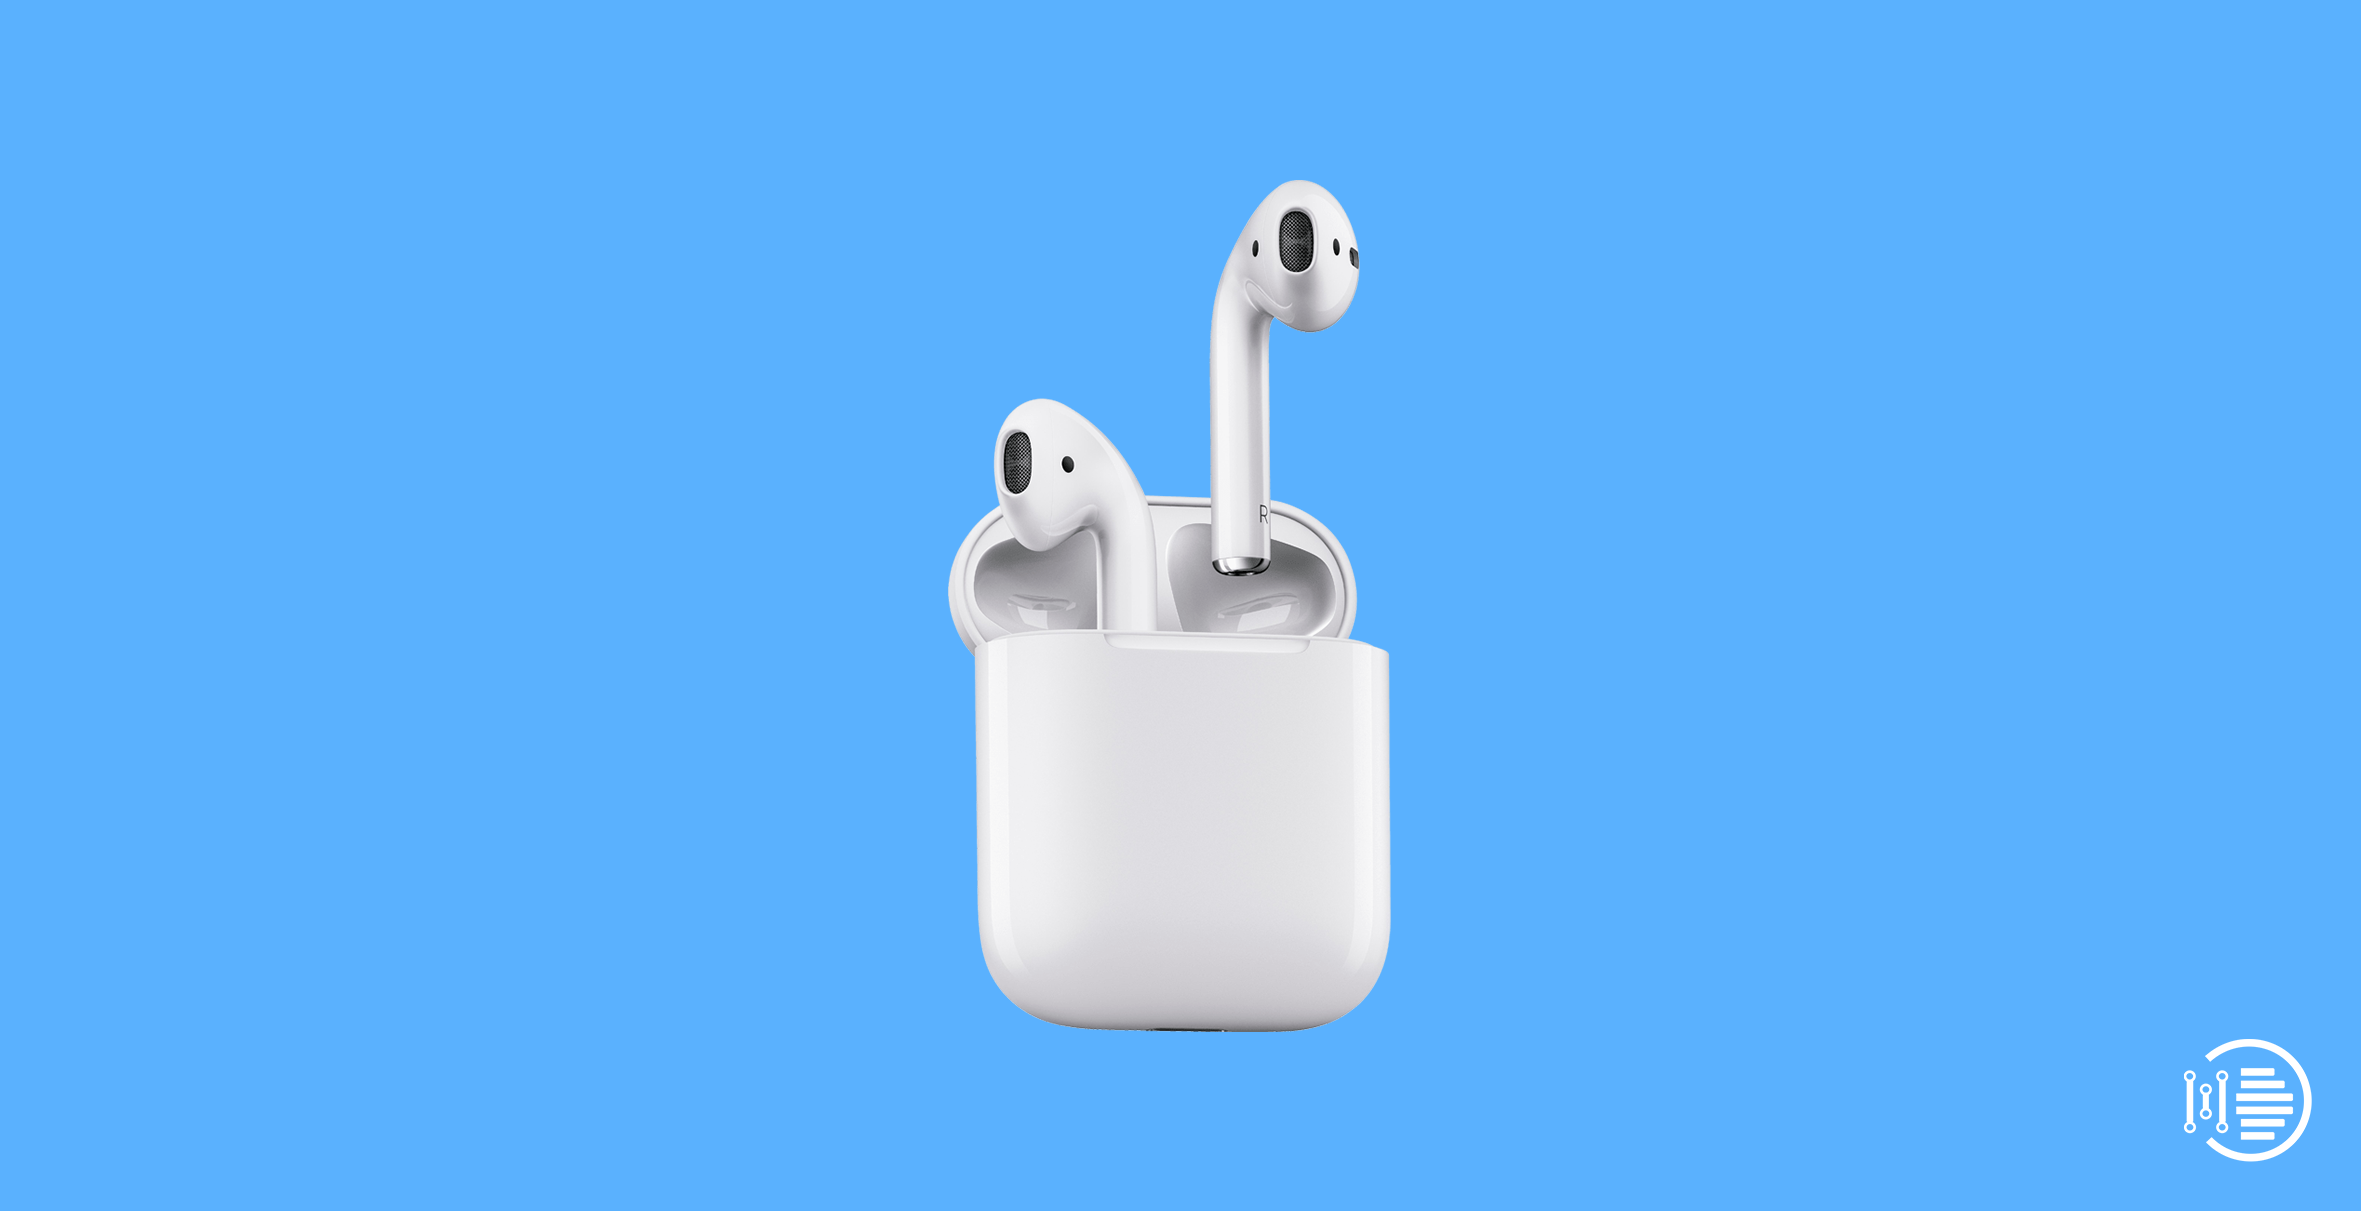 Airpods Connecting While in Case